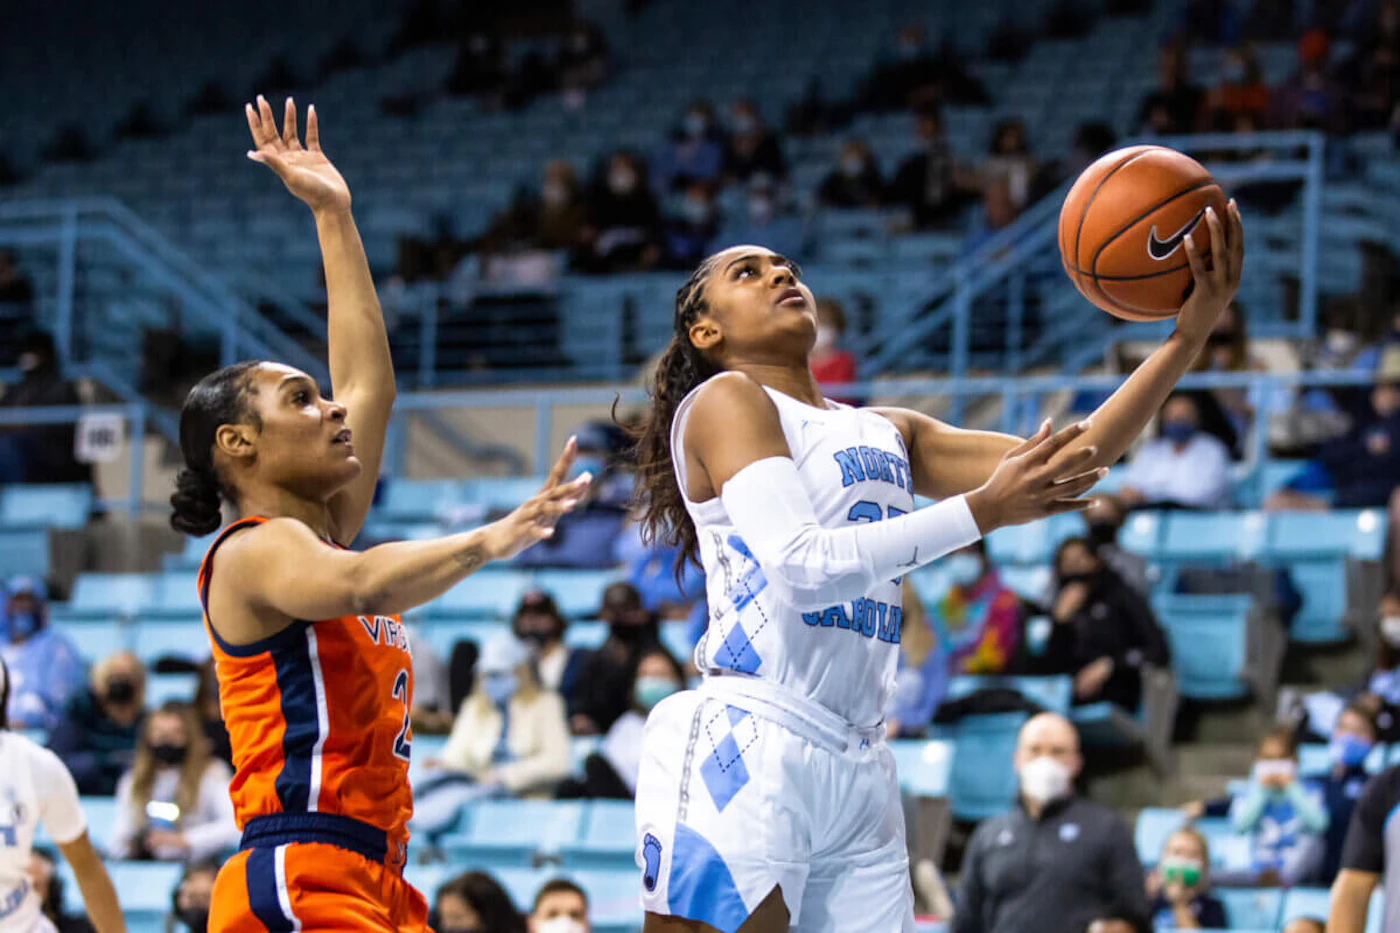 North Carolina's Deja Kelly attempts a layup during a Jan. 21 game with Virginia. Women's college teams like UNC, NC State, and UNC Charlotte have made it a golden time to be a fan in North Carolina. (AP Photo/Ben McKeown)